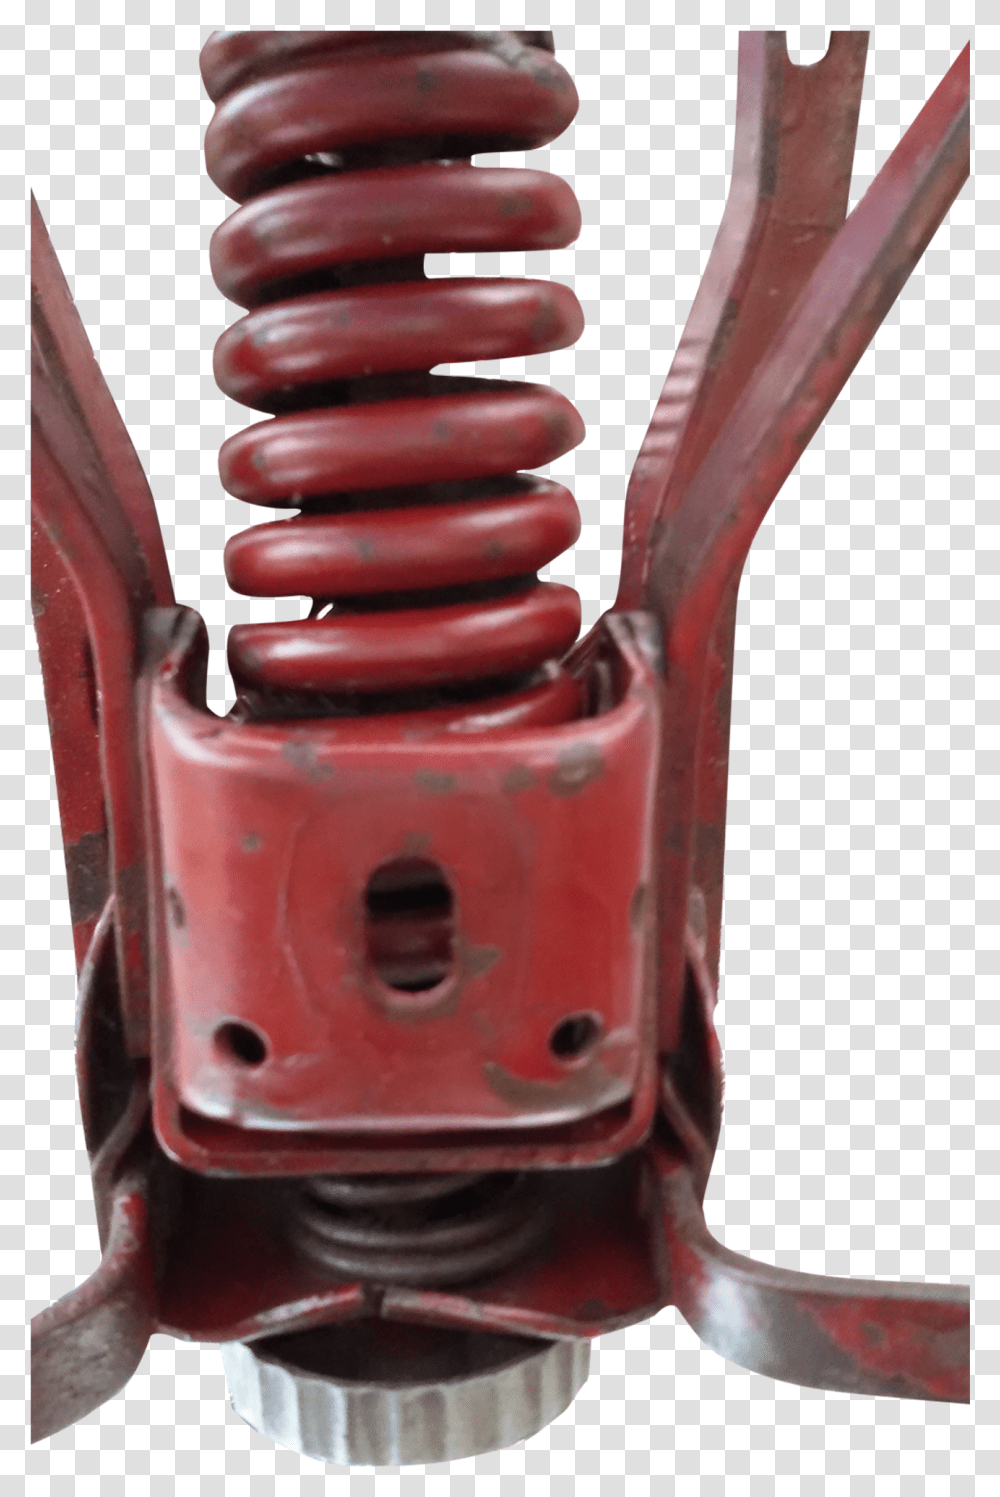 Motorcycle Sits 1940 Meat Hook Deco Mottos Bellows, Spiral, Coil, Fire Hydrant, Suspension Transparent Png